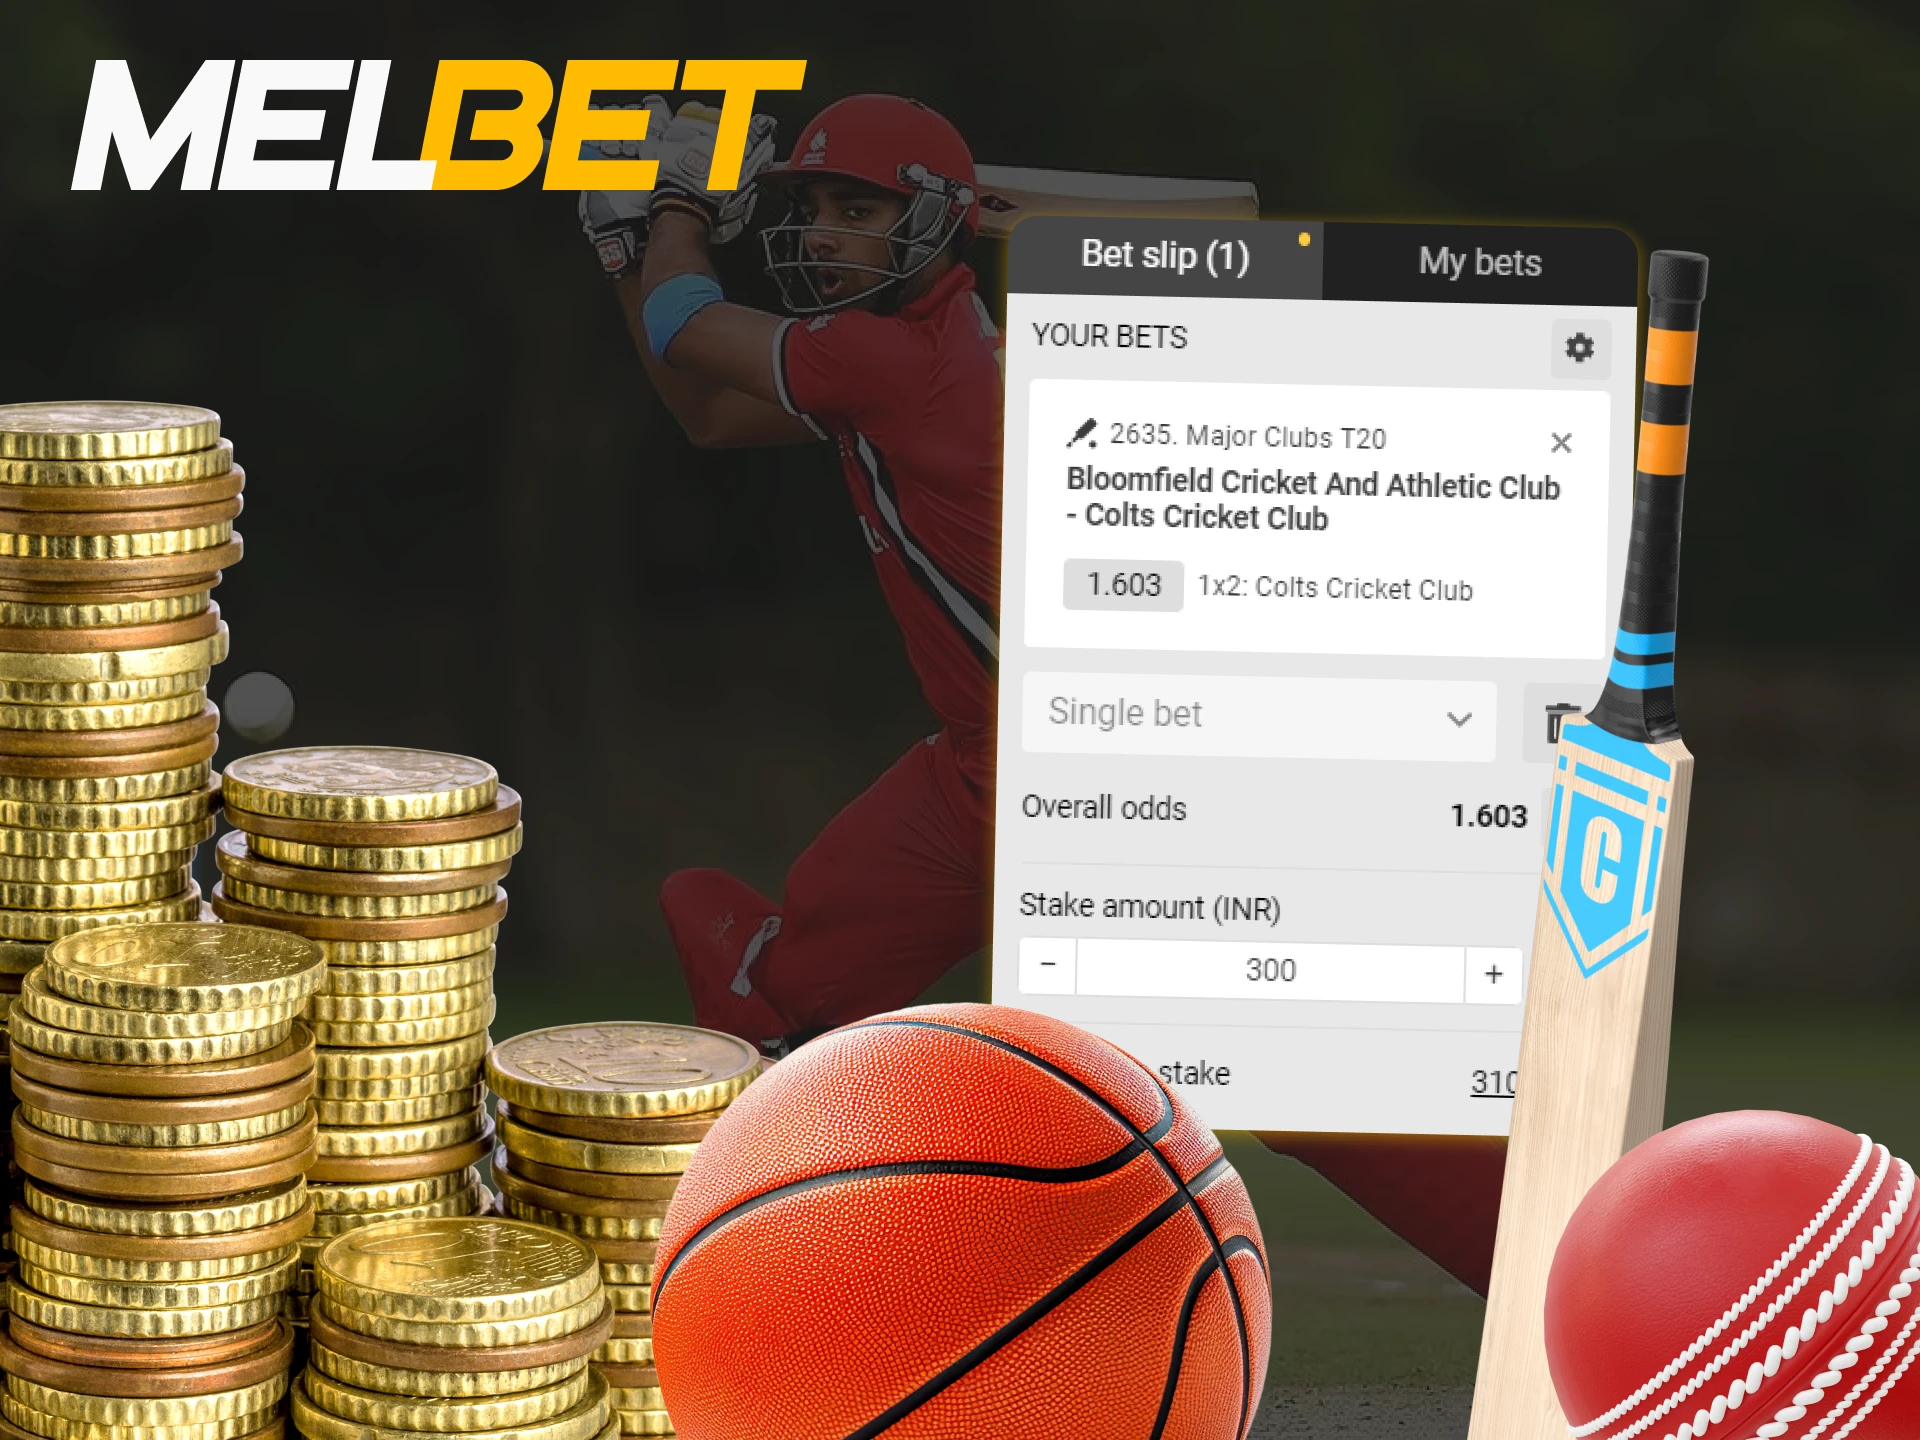 Betting on sports is very easy at Melbet.